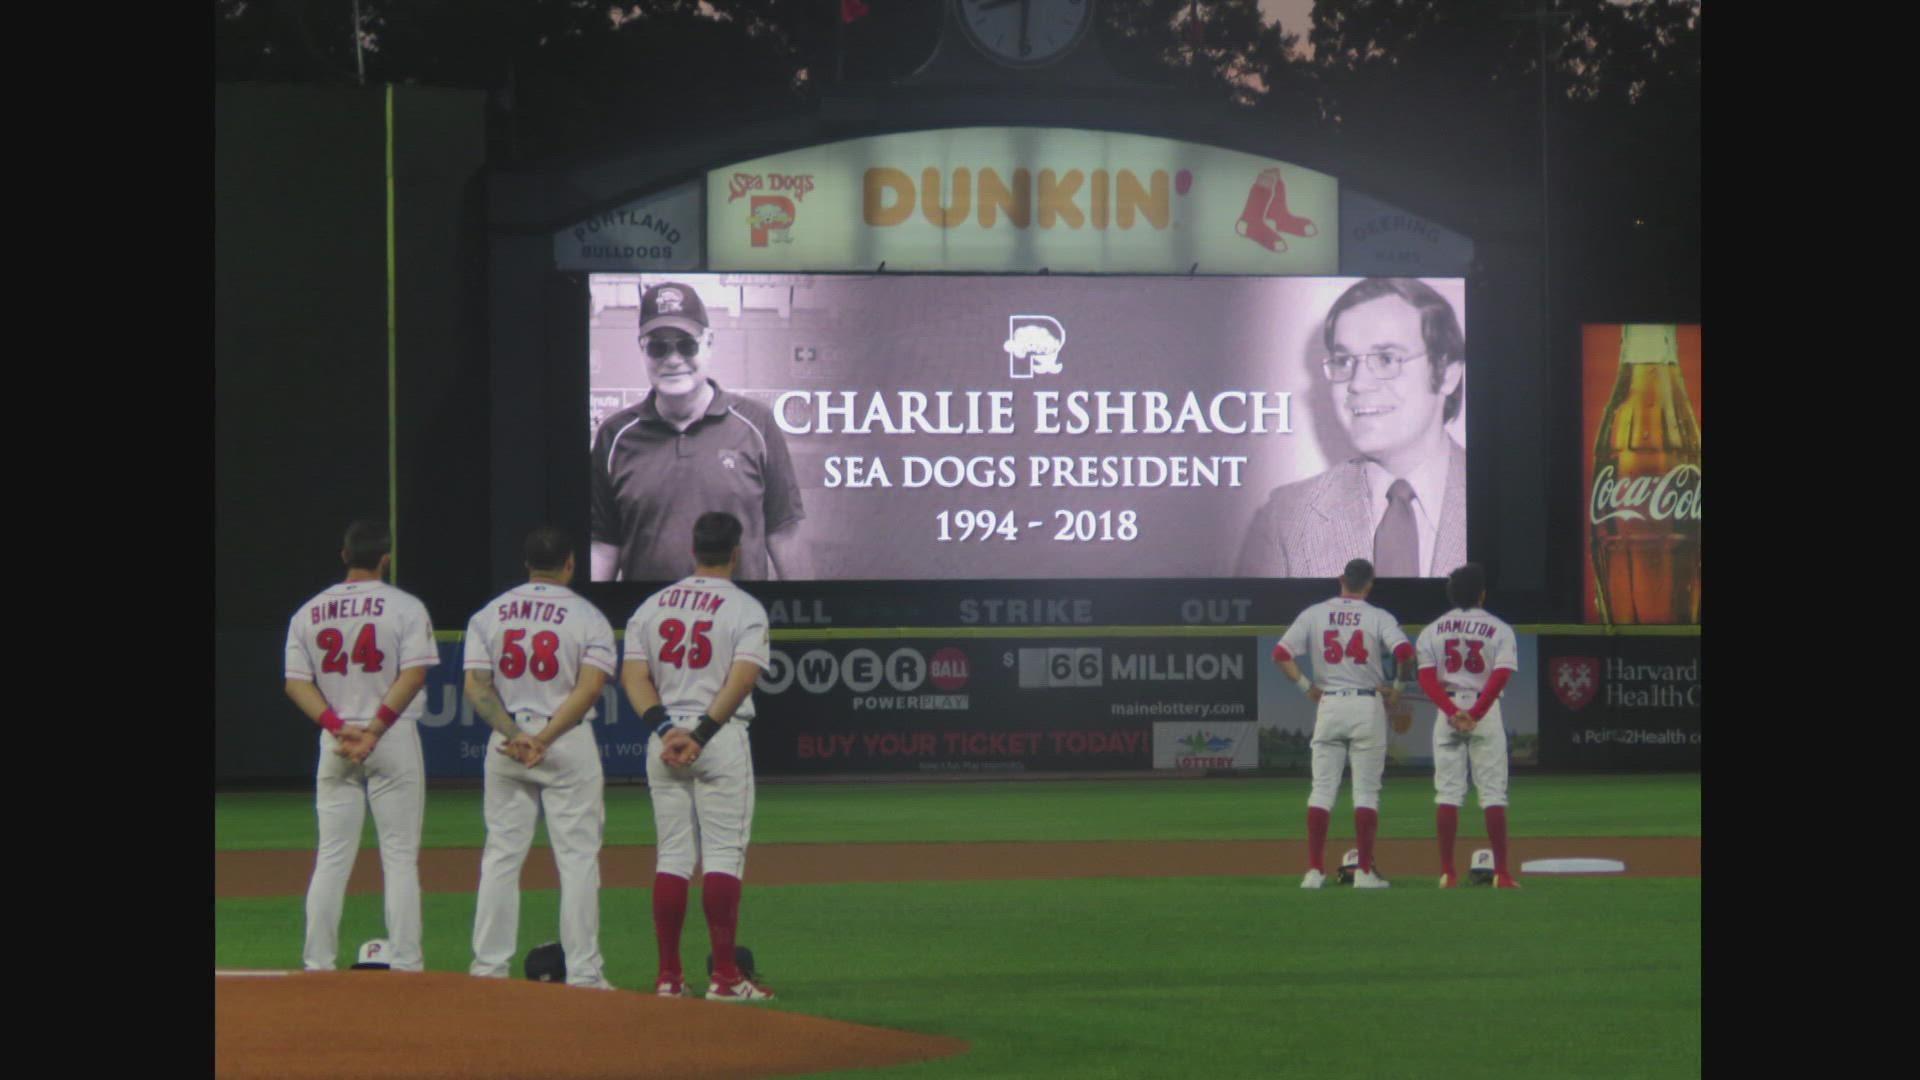 Eshbach has been called the 'King of Baseball' and is credited for building the Portland Sea Dogs and Hadlock Field into what they are today.